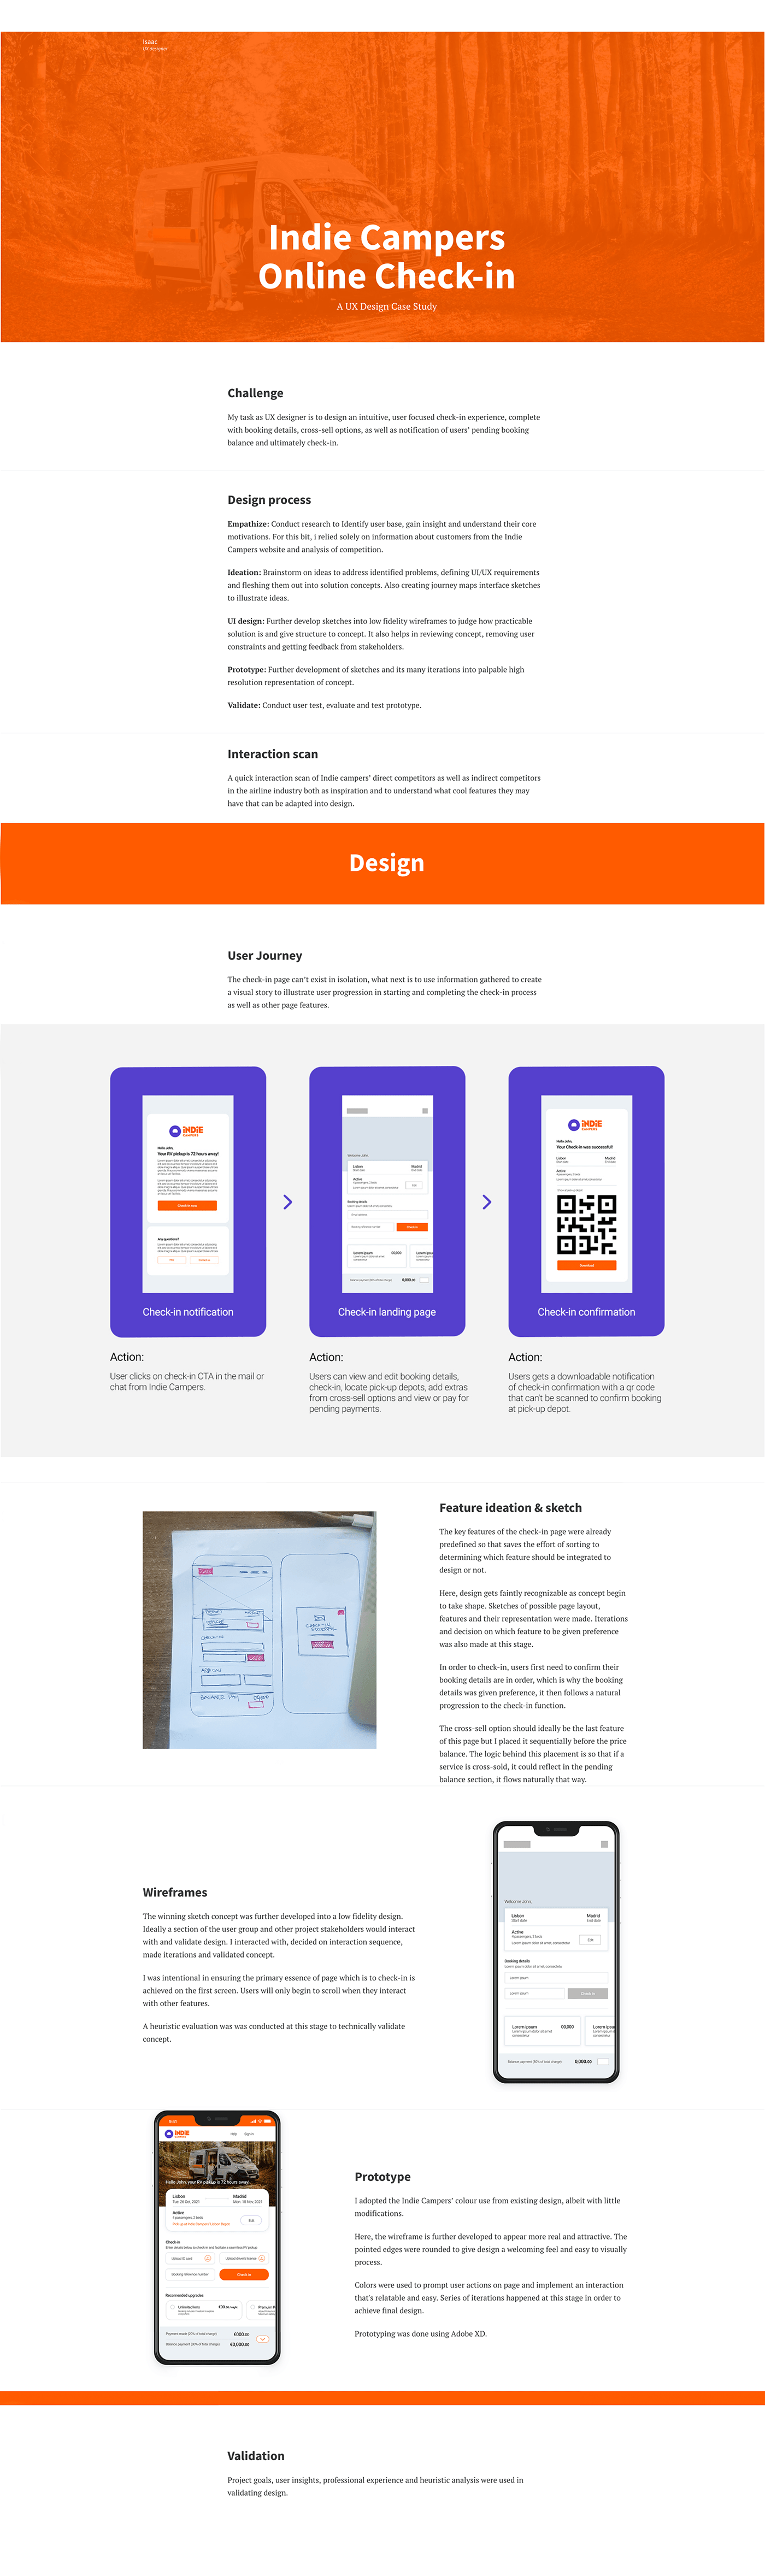 Adobe XD ui design user experience UI/UX Case Study indie campers experience design product design  mobile design Online Check in